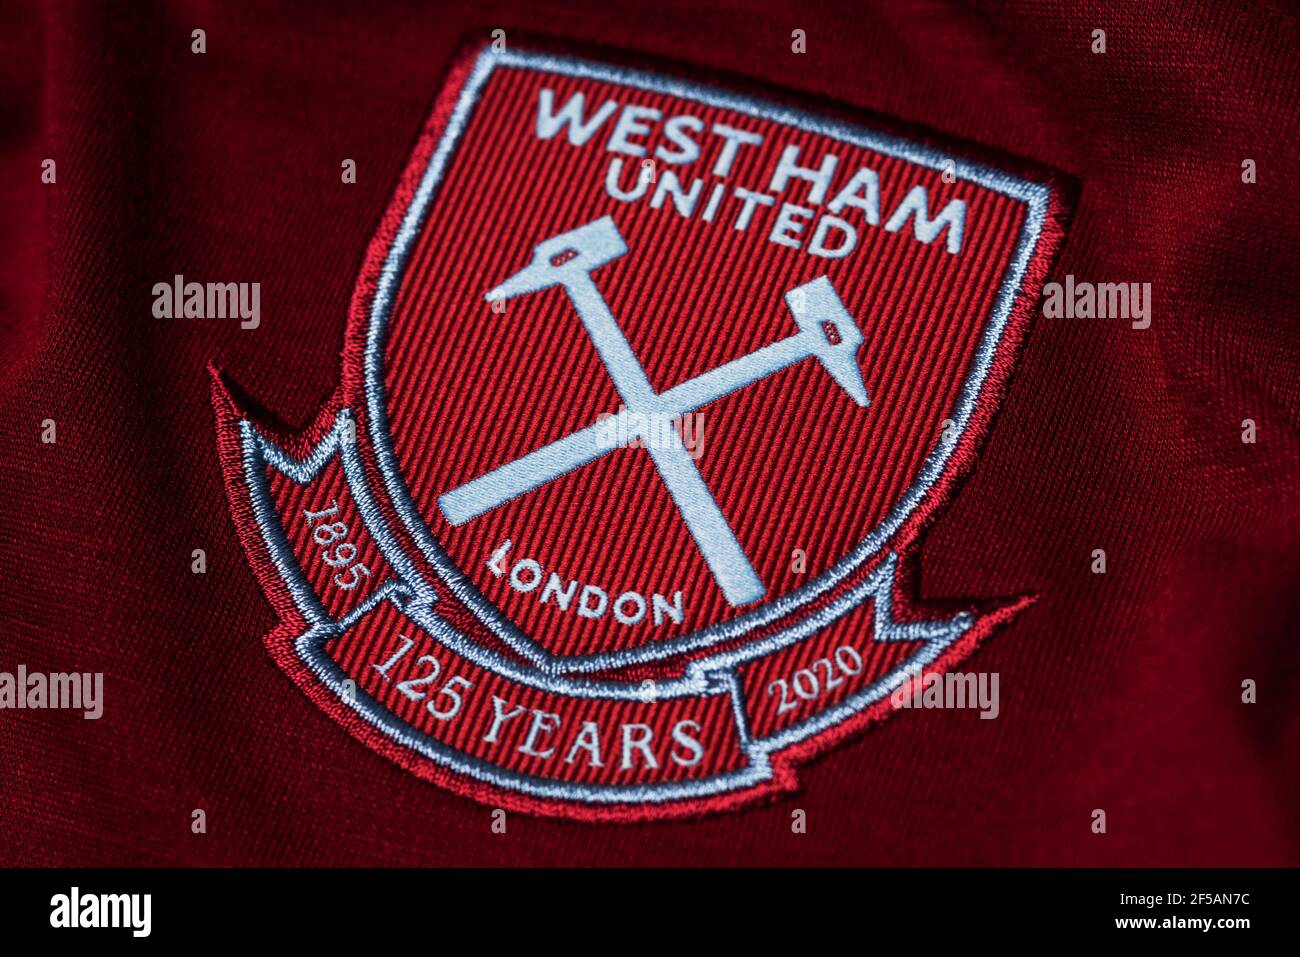 Close up of West Ham United FC jersey 2020/21 Stock Photo